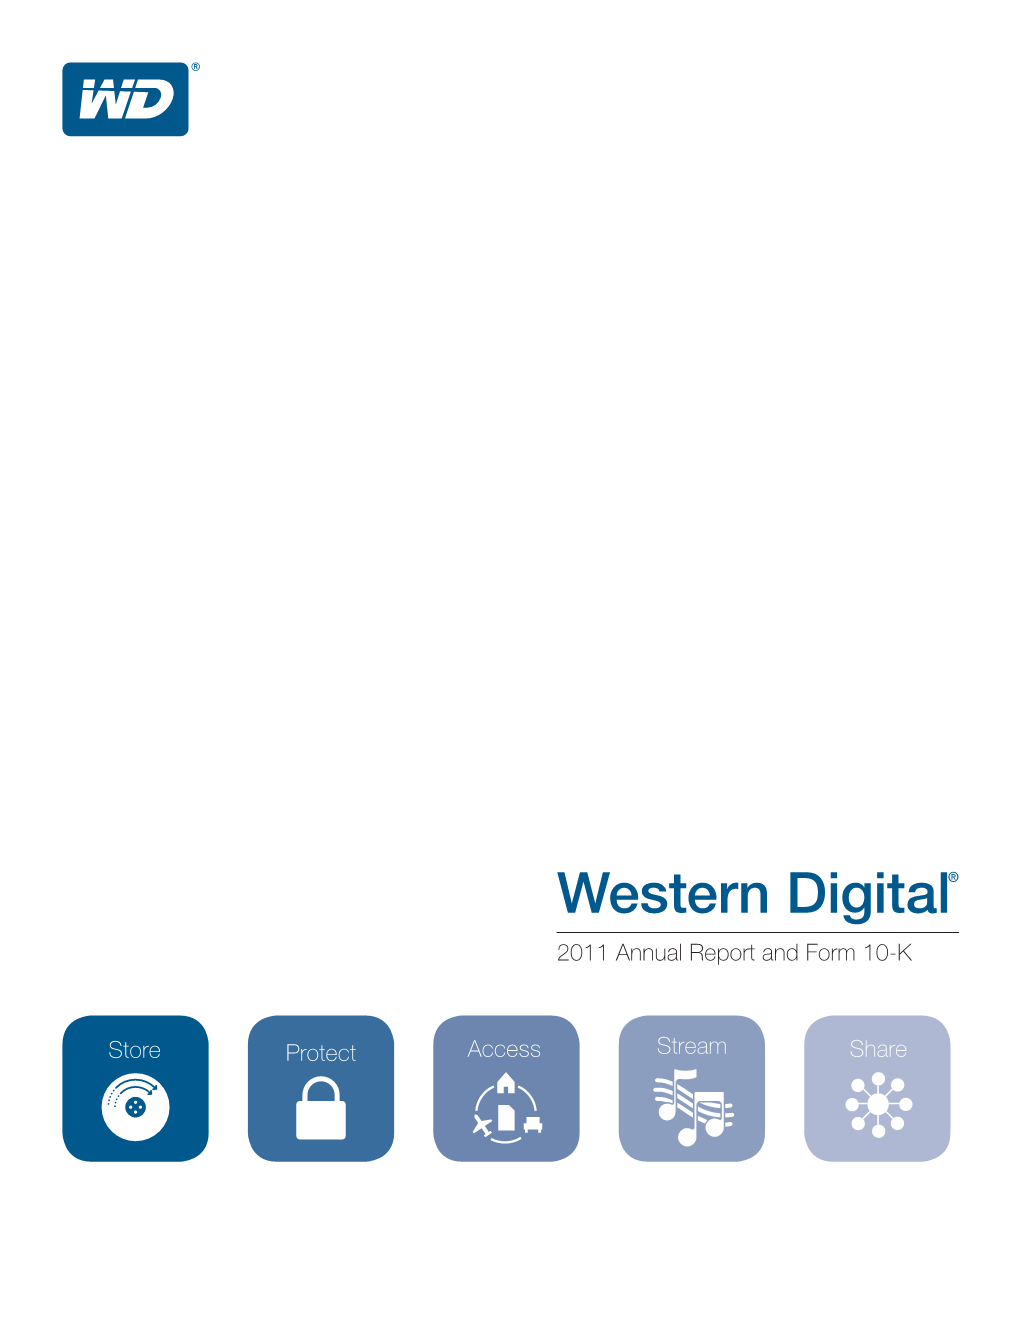 Western Digital® 2011 Annual Report and Form 10-K